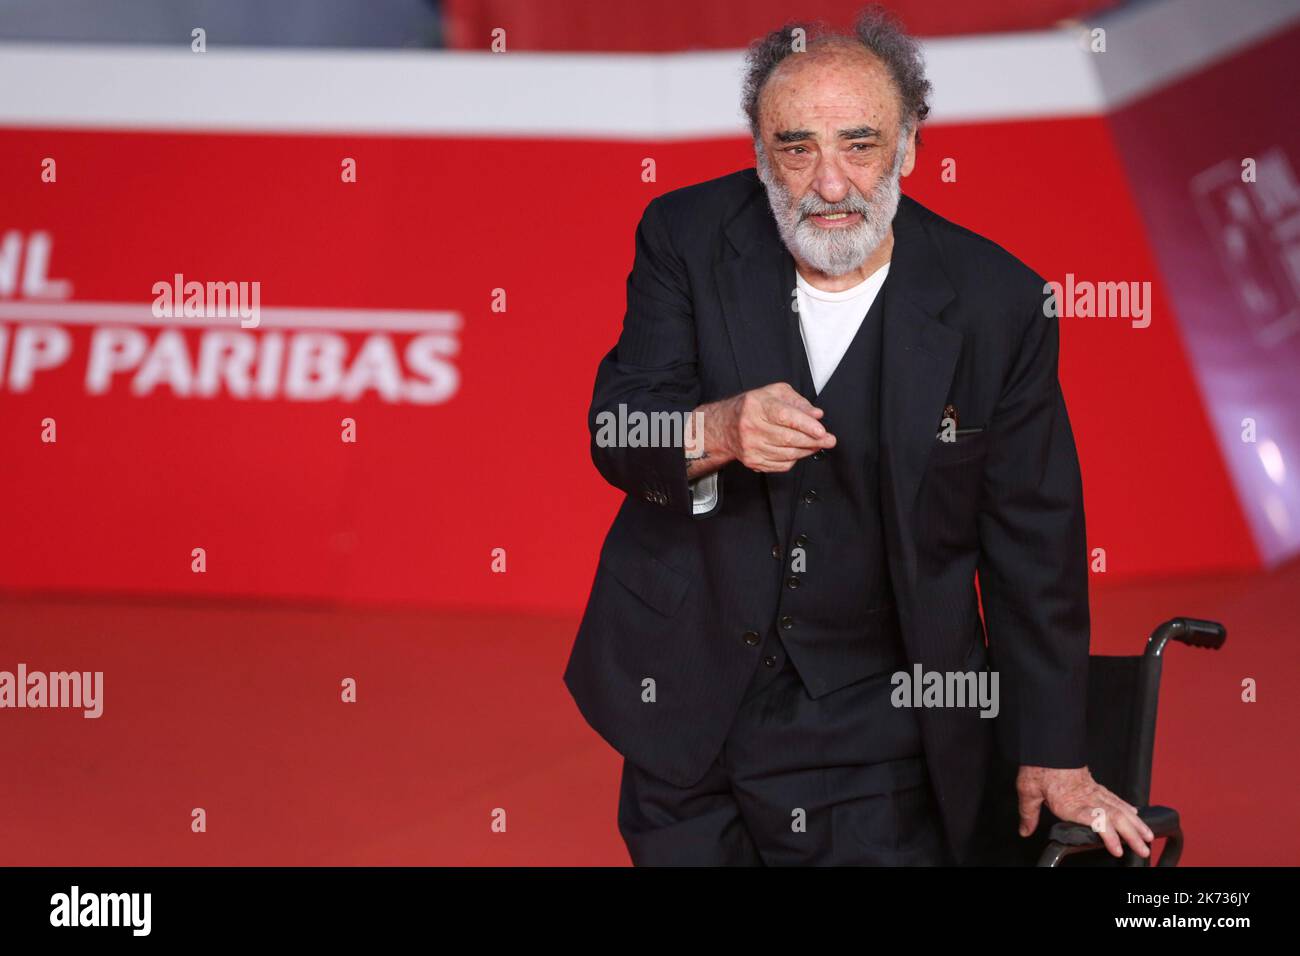 Alessandro Haber attends the red carpet of the movie 'La divina cometa' at the opening of Rome Film Fest at Auditorium Parco della Musica. Stock Photo